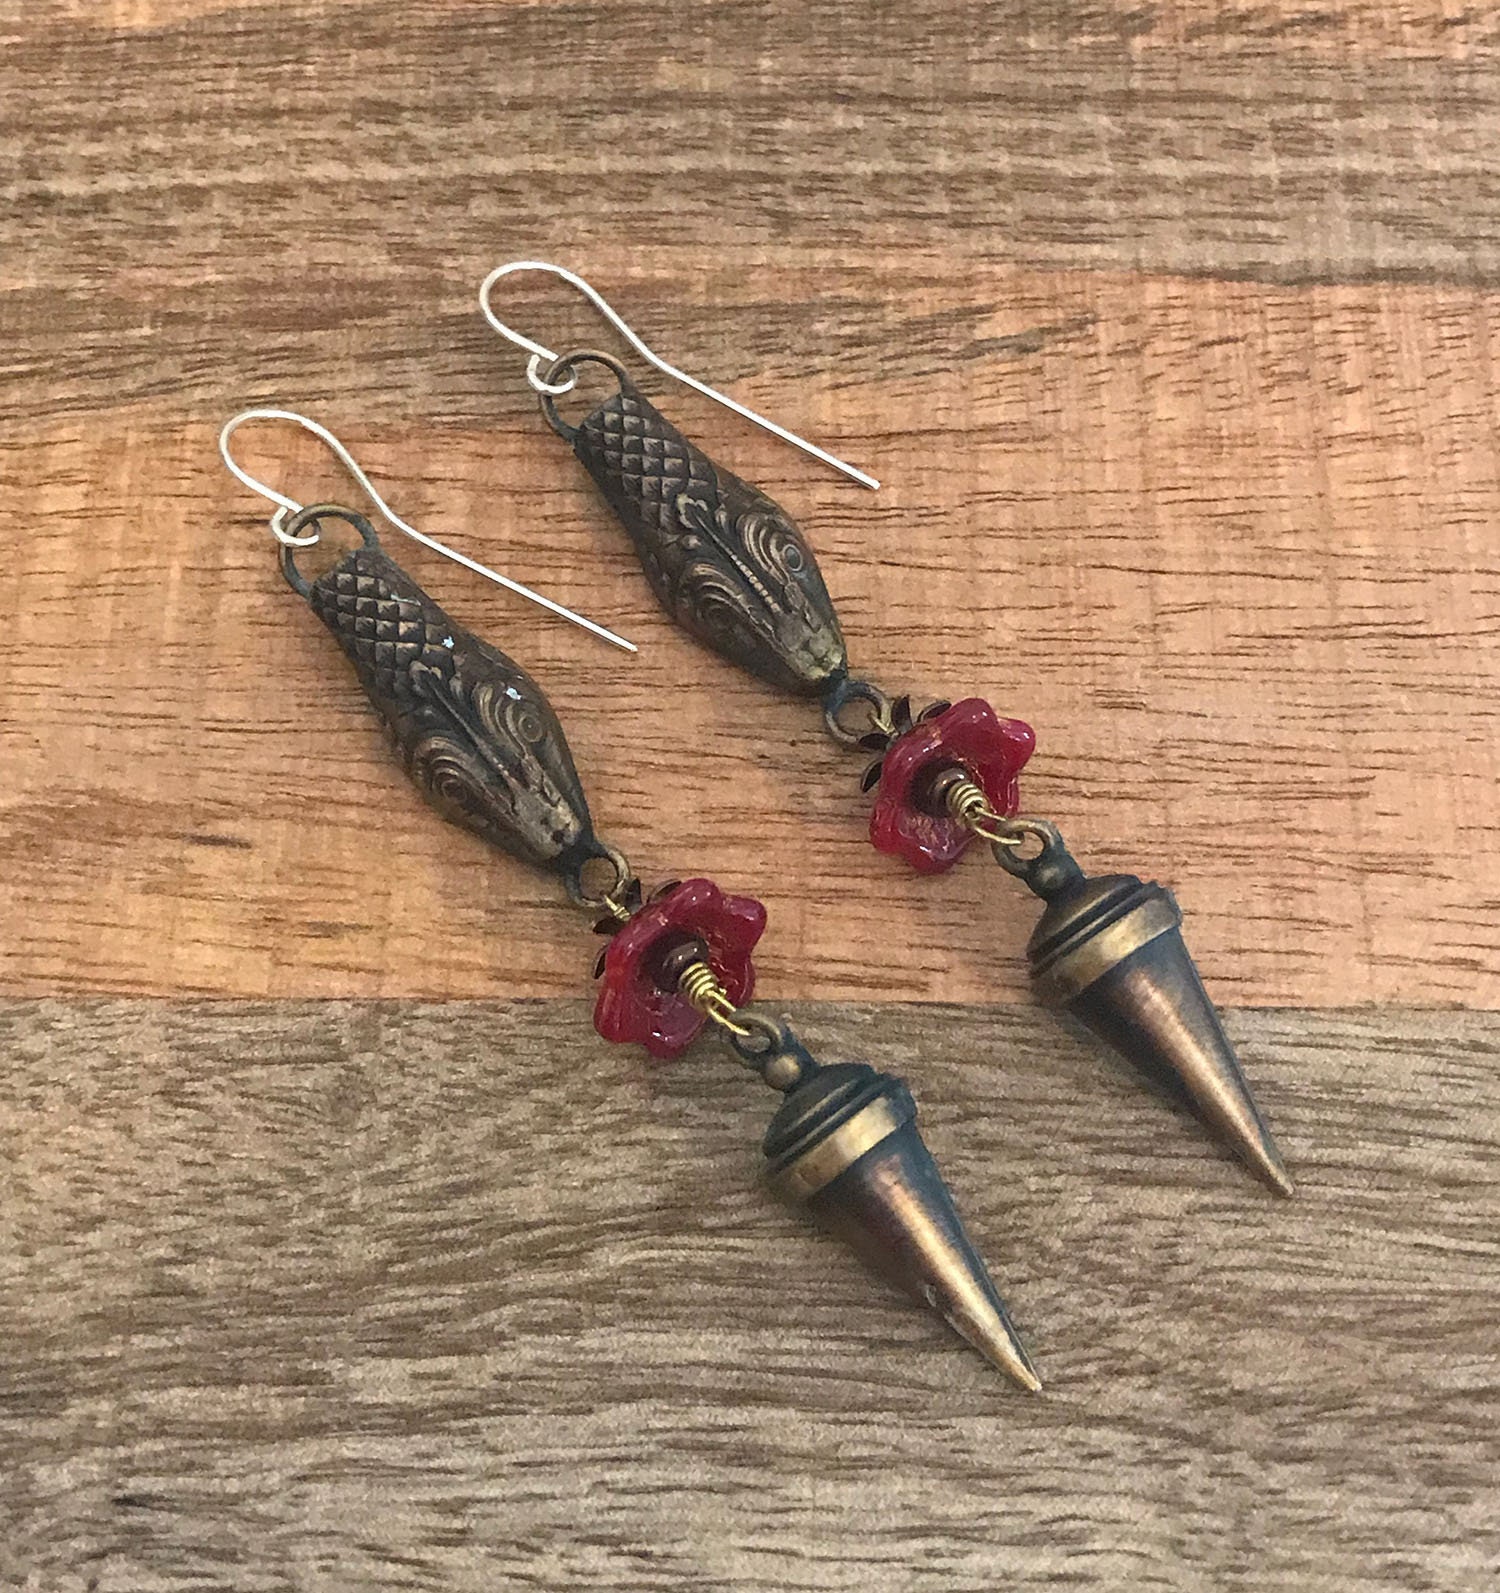 Boutique Artisan Earrings - Cedar Snake Isla Leather Earrings Large - Handcrafted Handmade Ethically Made Jewelry